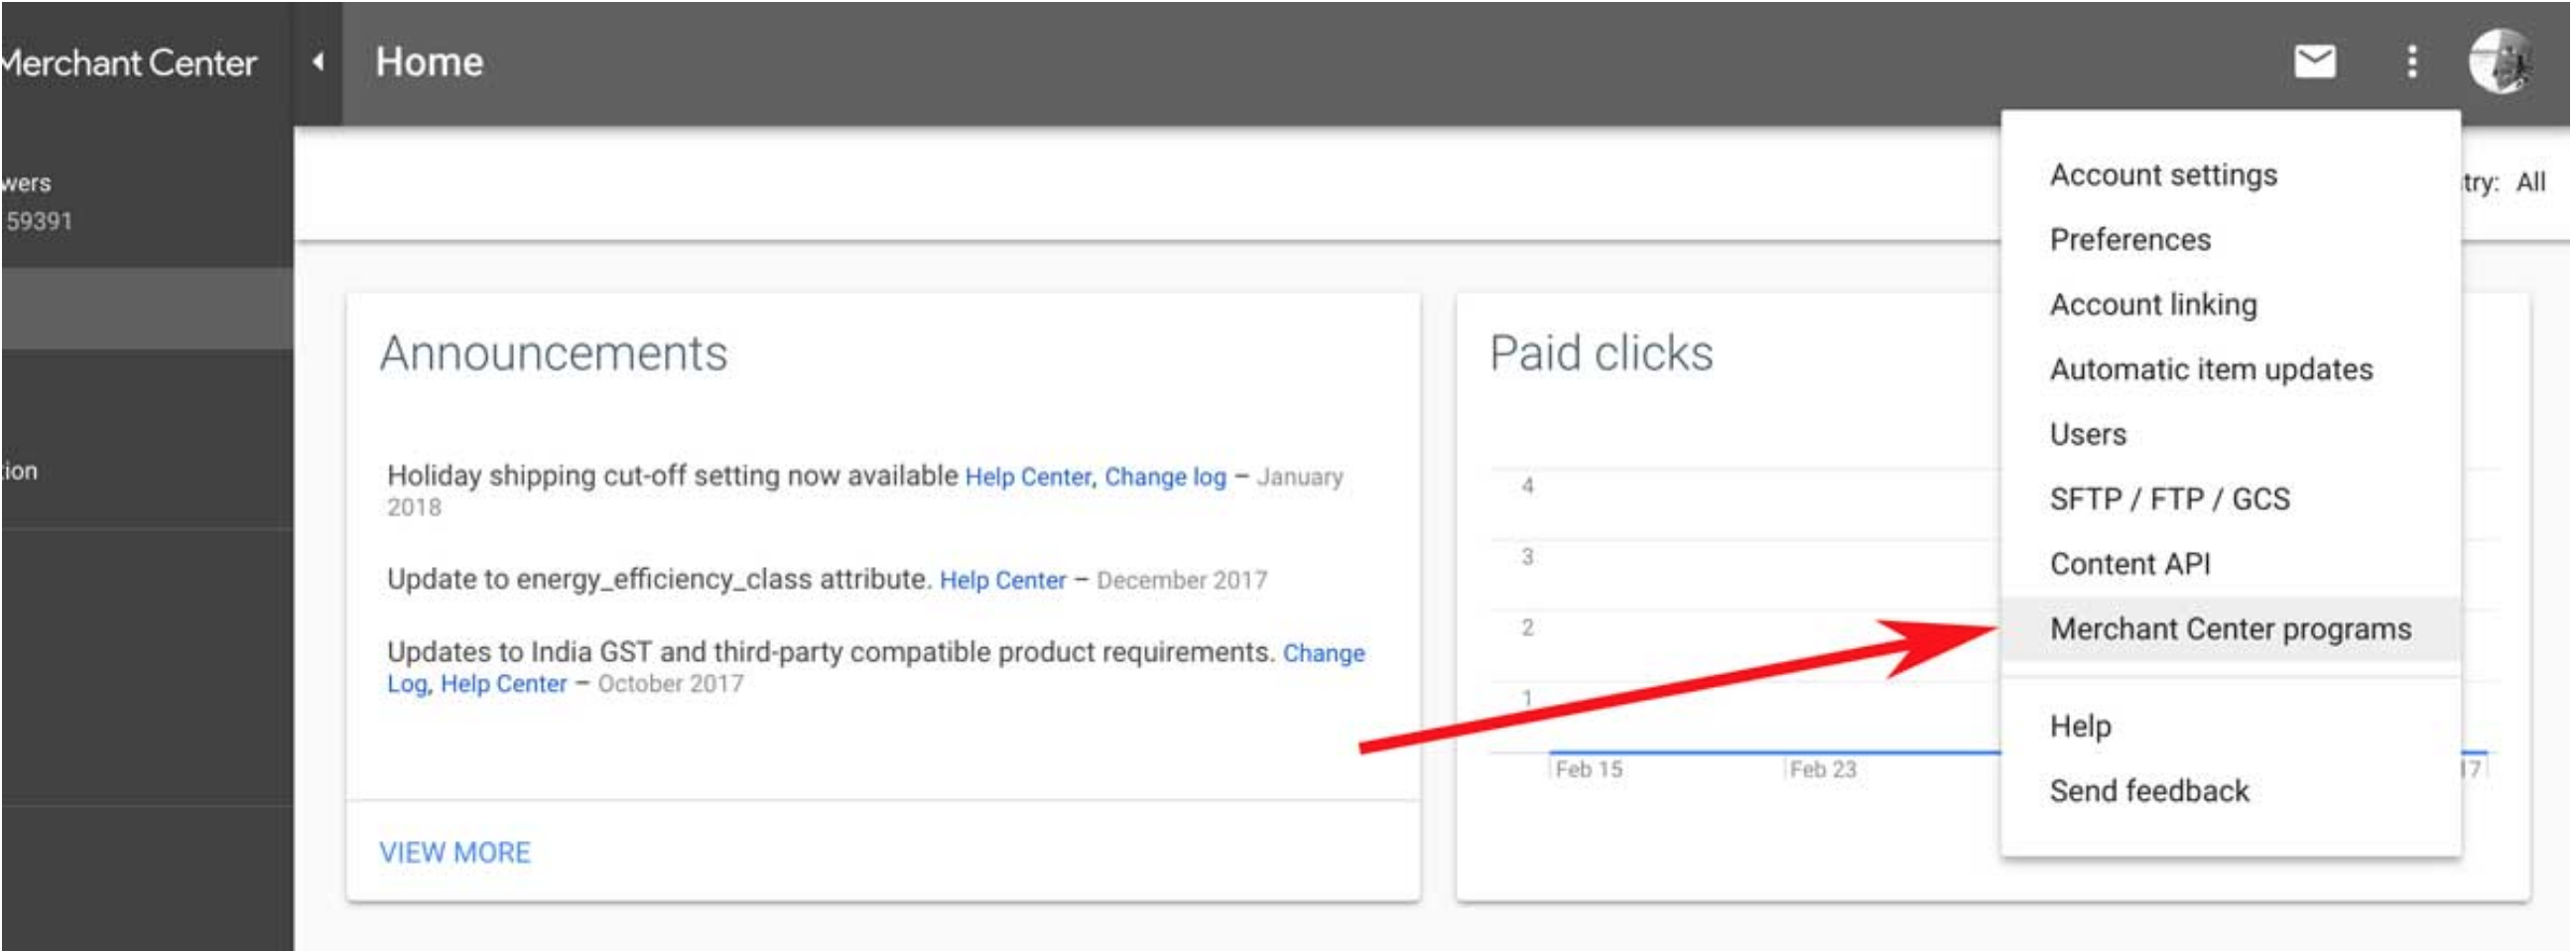 Login to your Google Merchant Center account, open the menu on the right and click on Merchant Center Programs